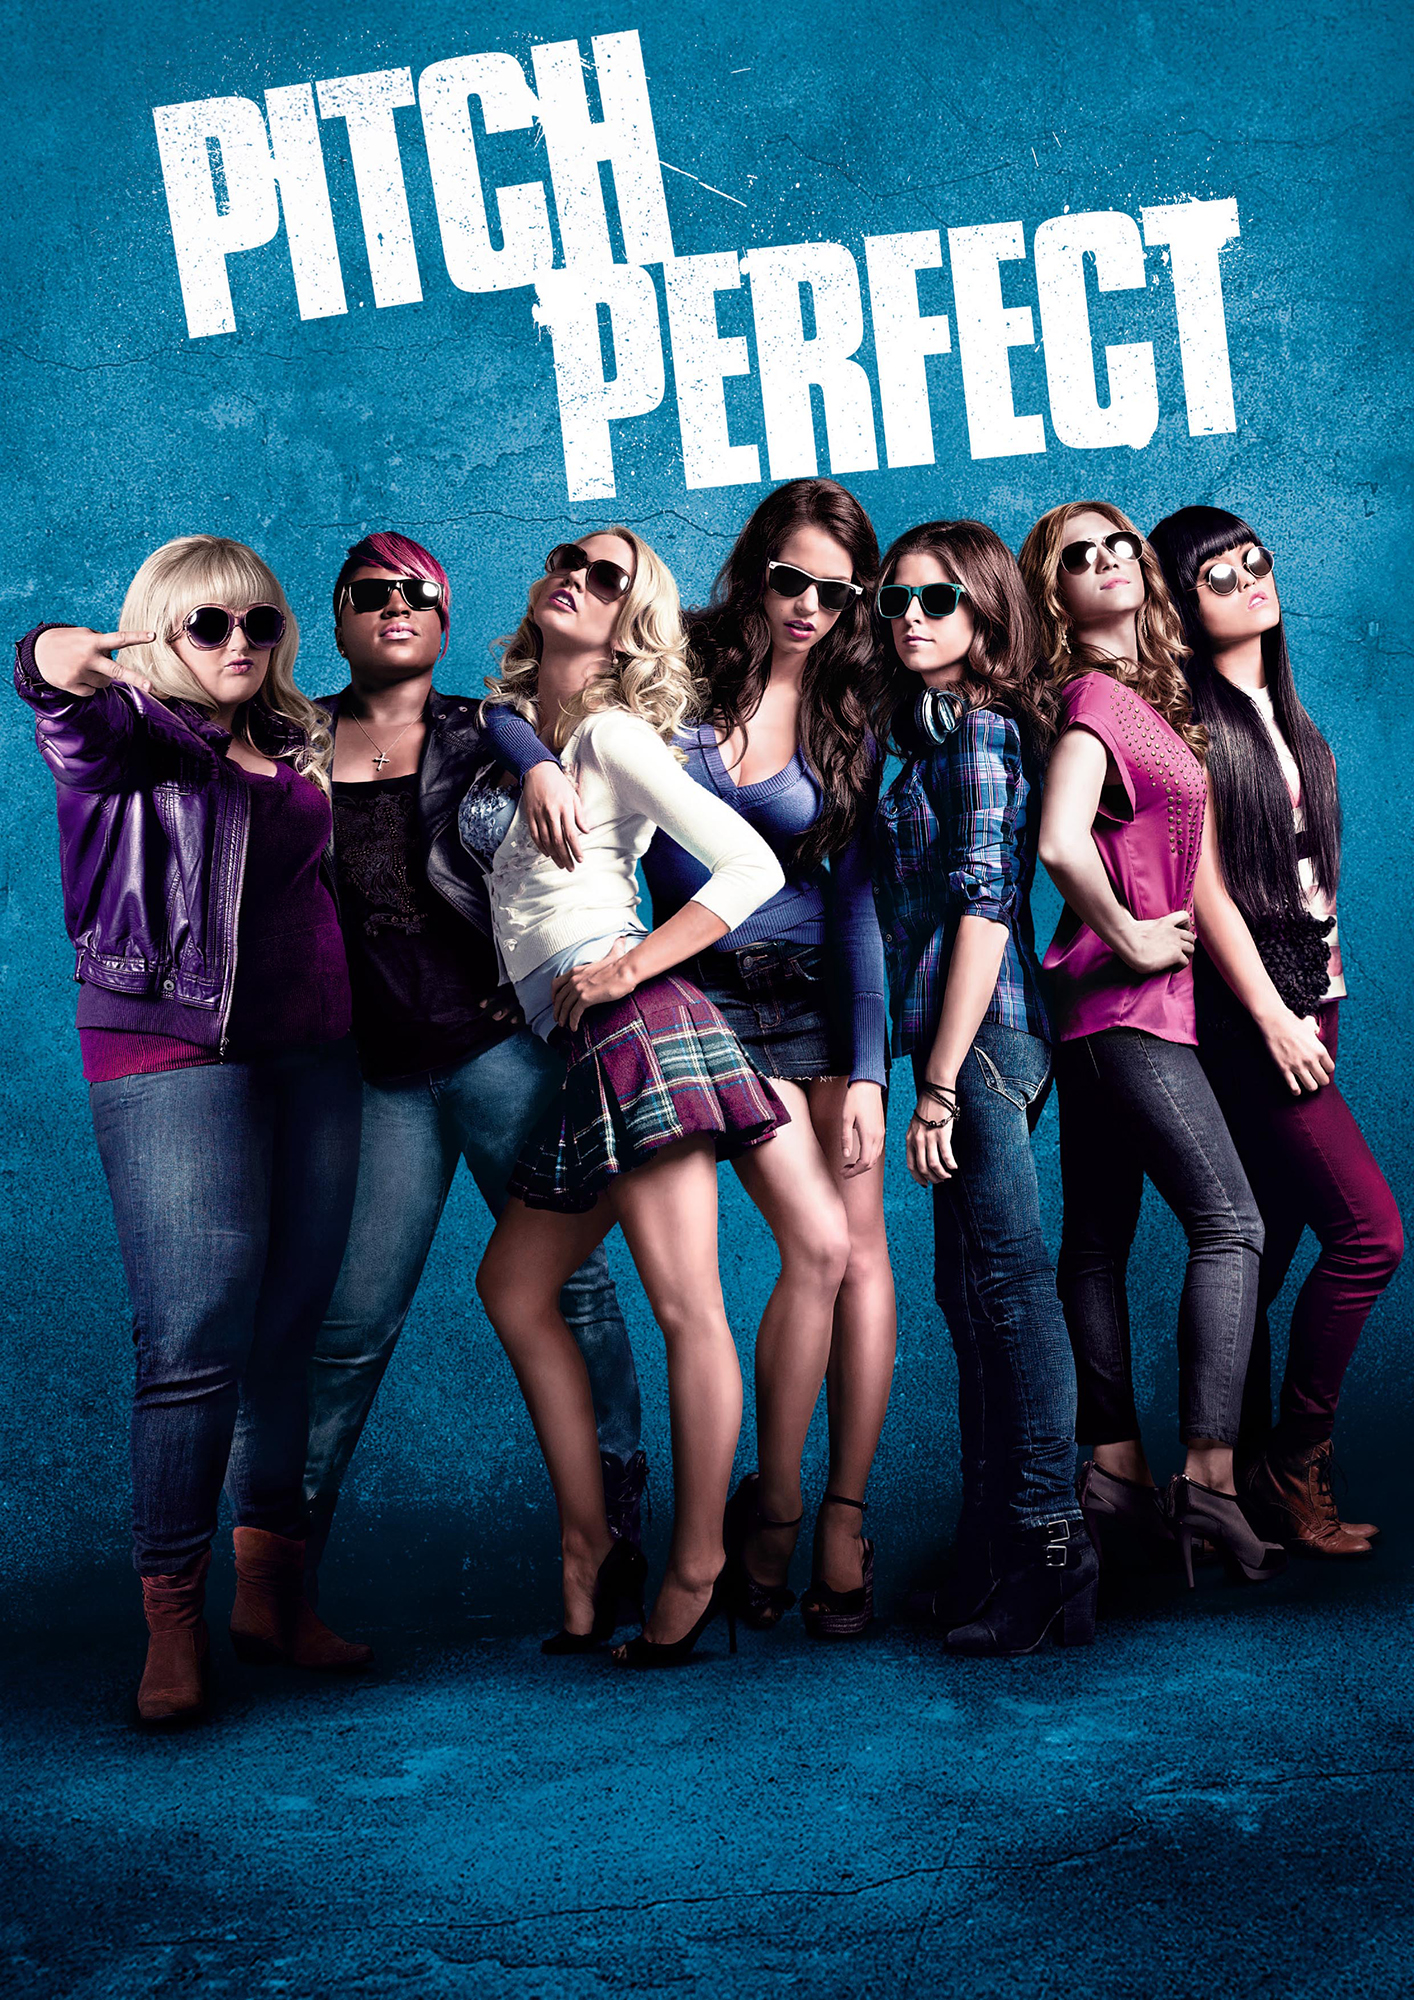 Pitch perfect cast